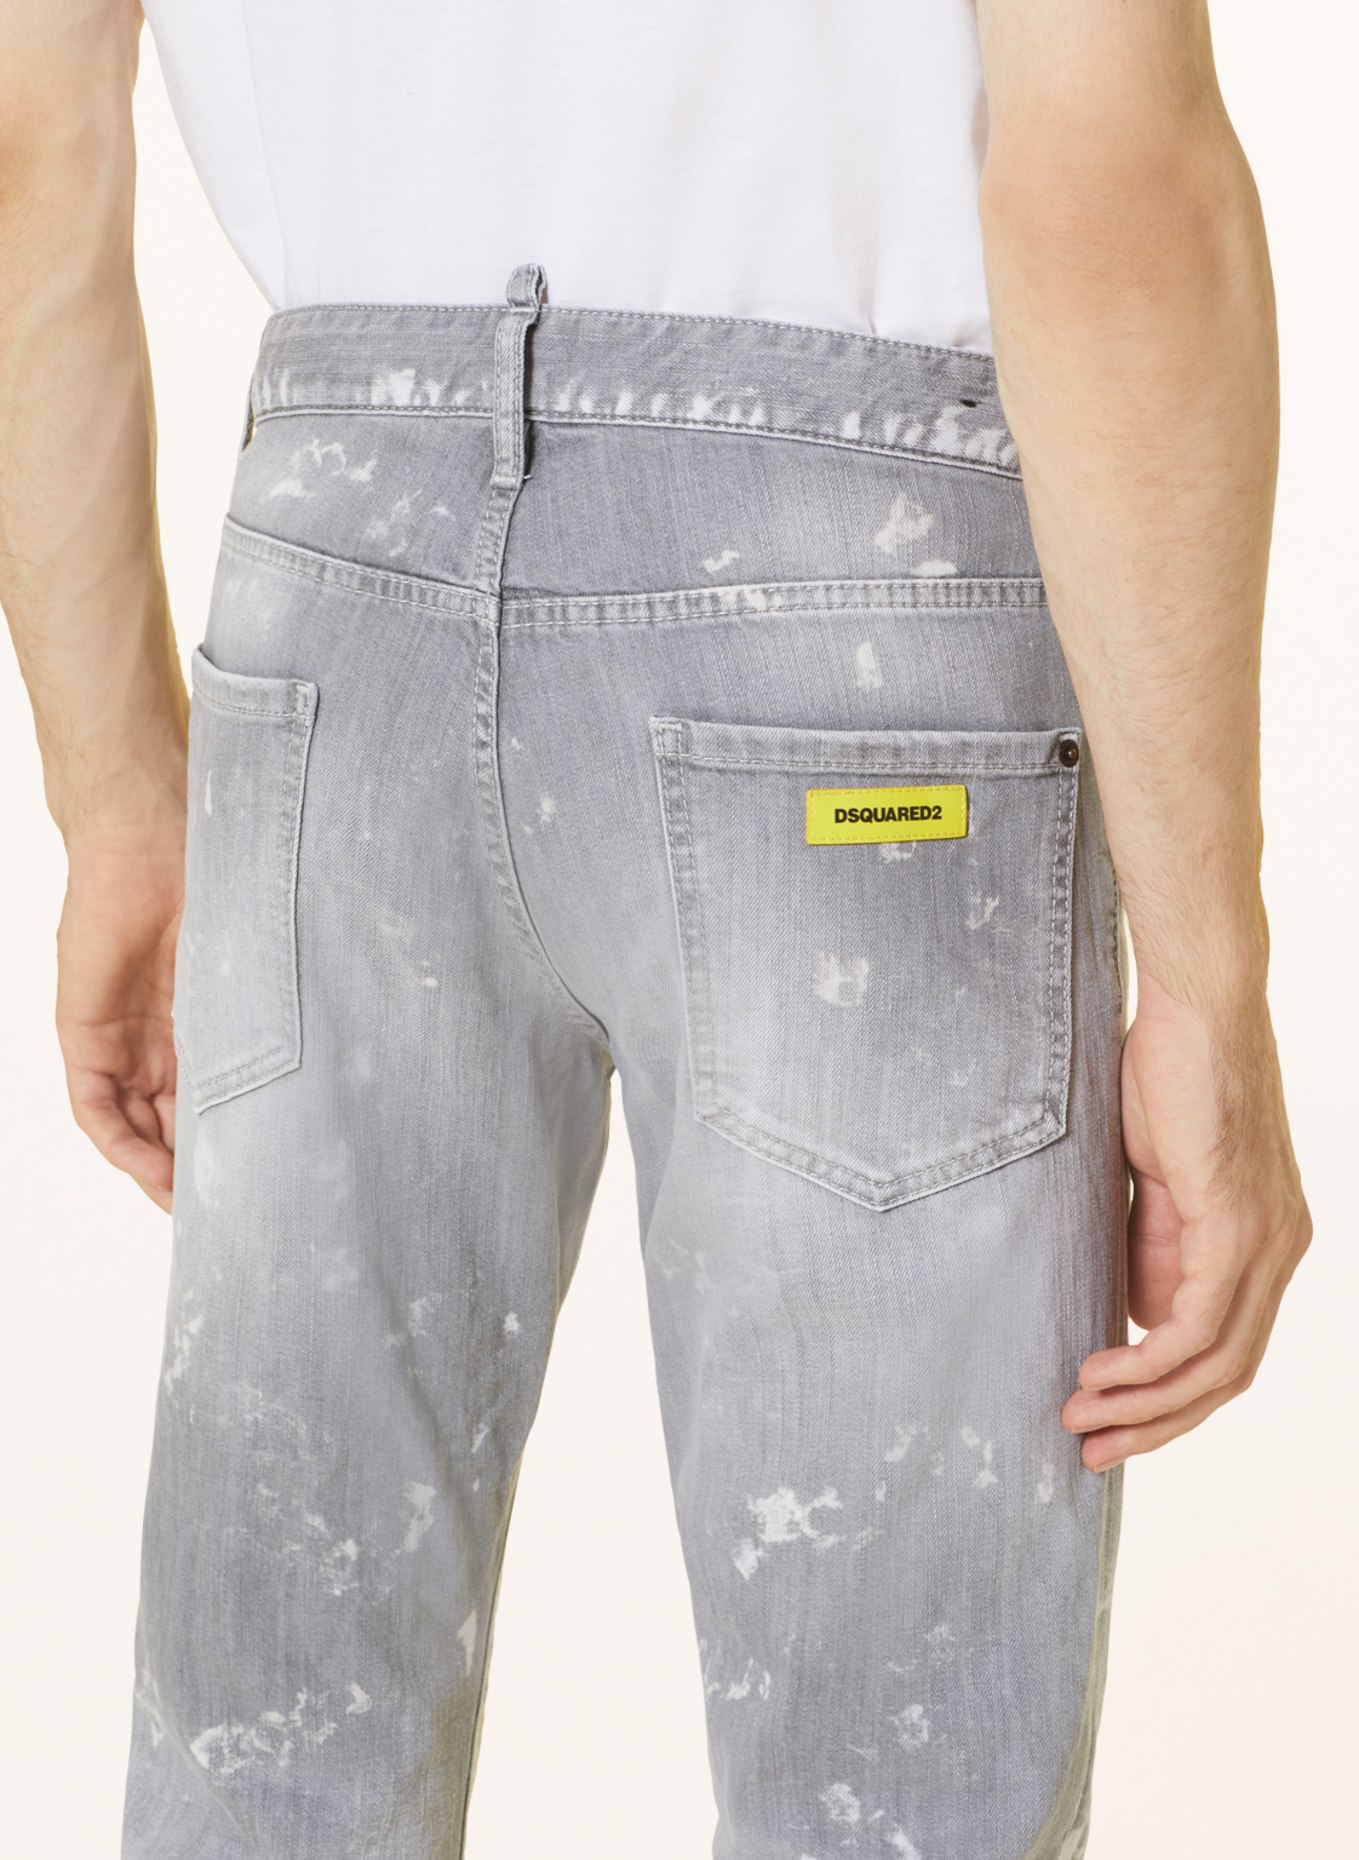 DSQUARED2 Jeans COOL GUY Extra Slim Fit, Farbe: 852 GREY (Bild 5)